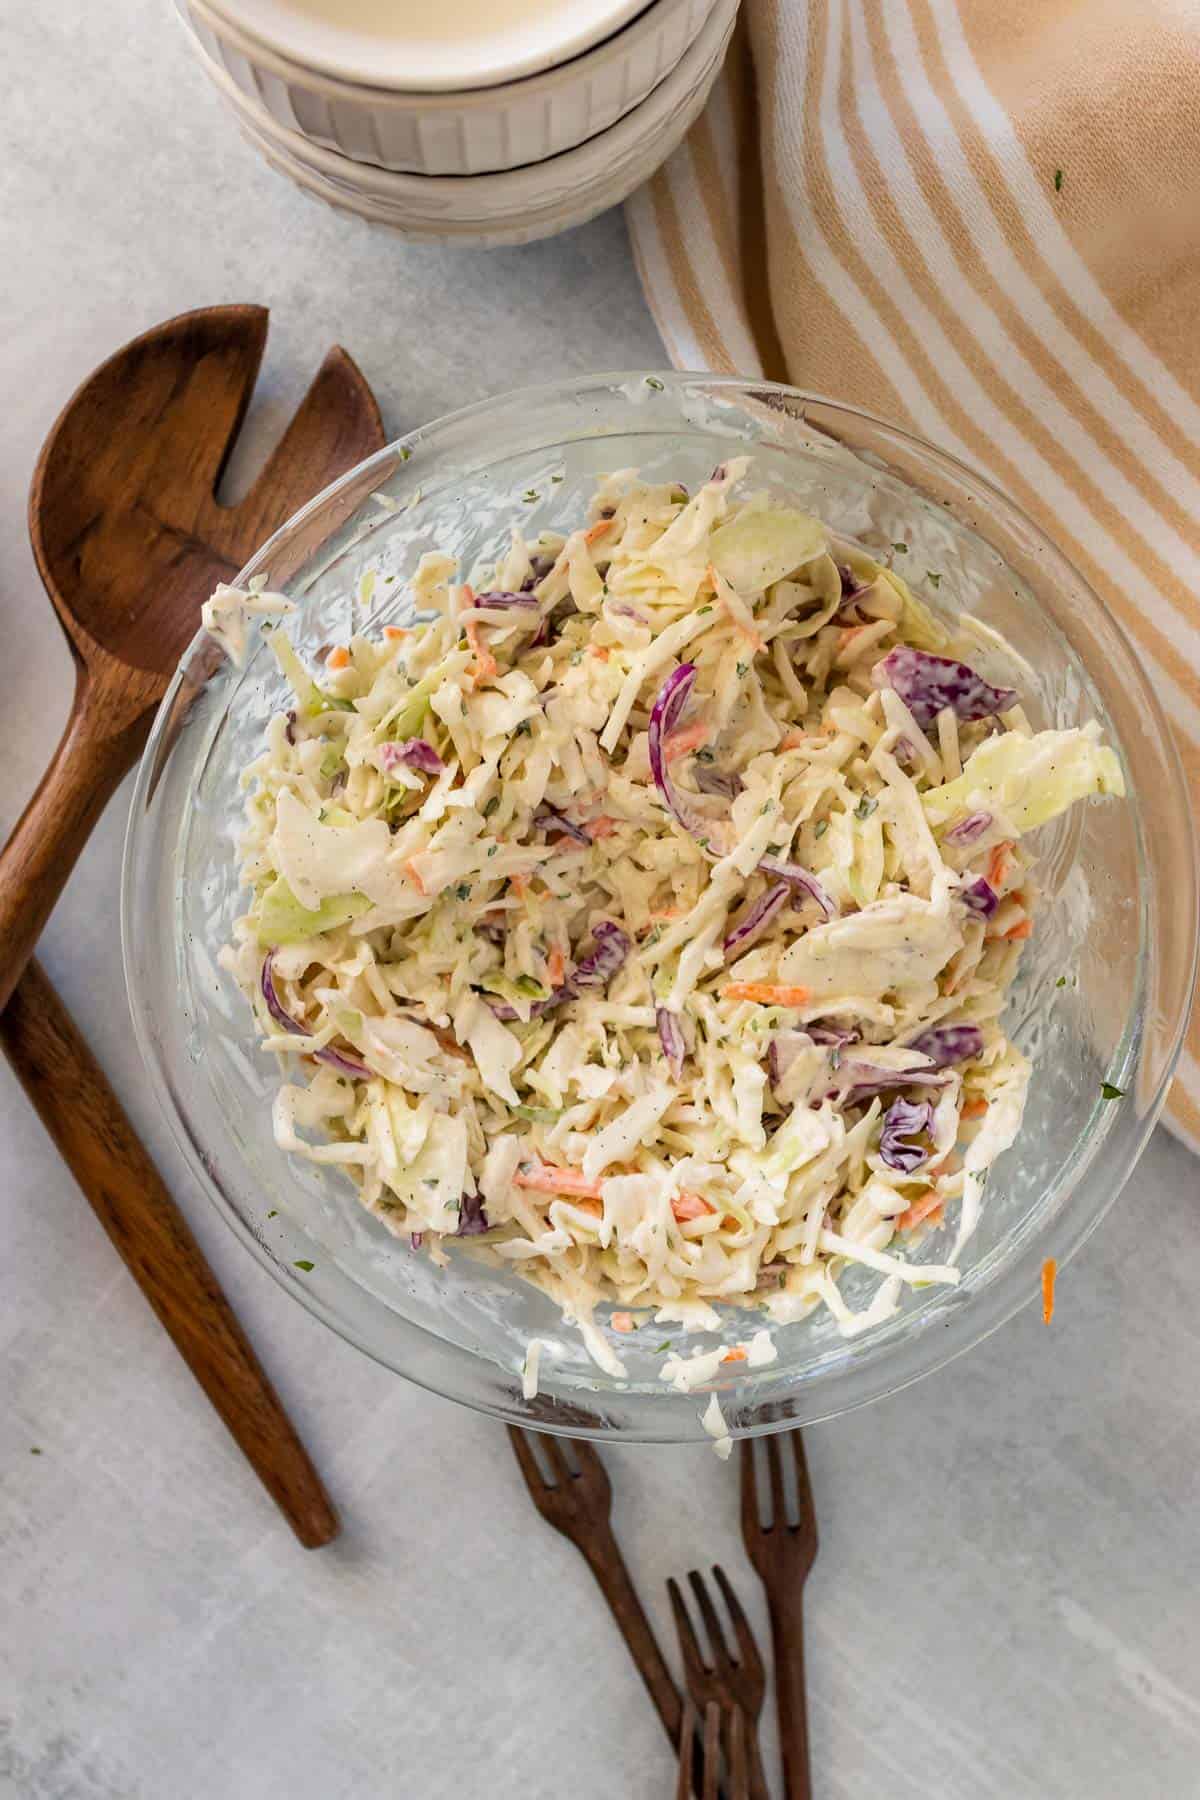 Low carb coleslaw in a large glass bowl next to wooden serving utensils, as seen from above